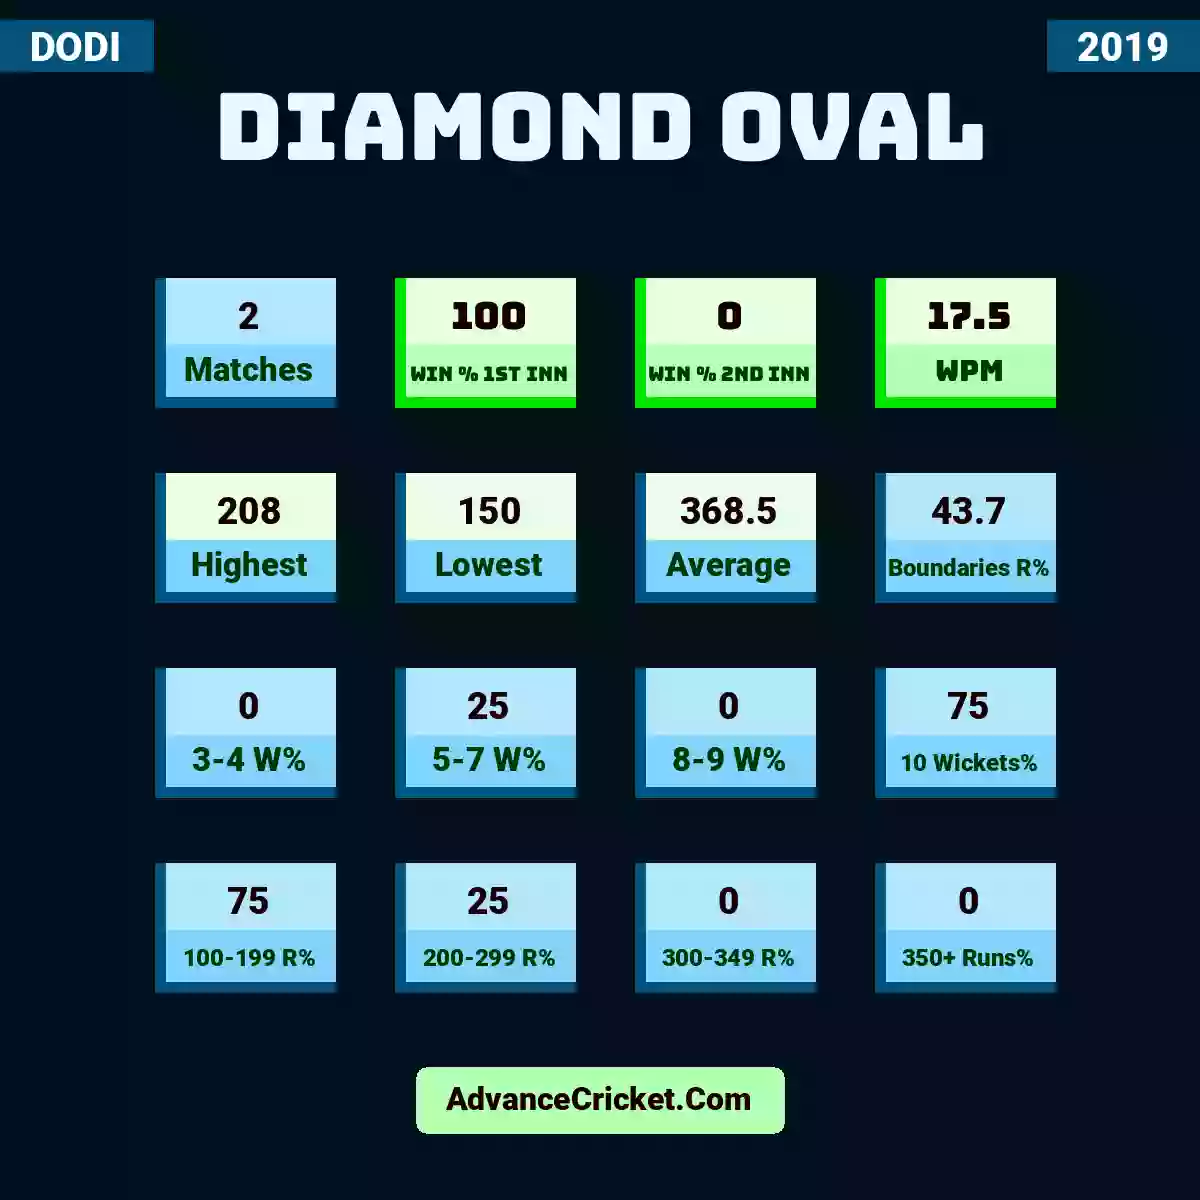 Image showing Diamond Oval with Matches: 2, Win % 1st Inn: 100, Win % 2nd Inn: 0, WPM: 17.5, Highest: 208, Lowest: 150, Average: 368.5, Boundaries R%: 43.7, 3-4 W%: 0, 5-7 W%: 25, 8-9 W%: 0, 10 Wickets%: 75, 100-199 R%: 75, 200-299 R%: 25, 300-349 R%: 0, 350+ Runs%: 0.